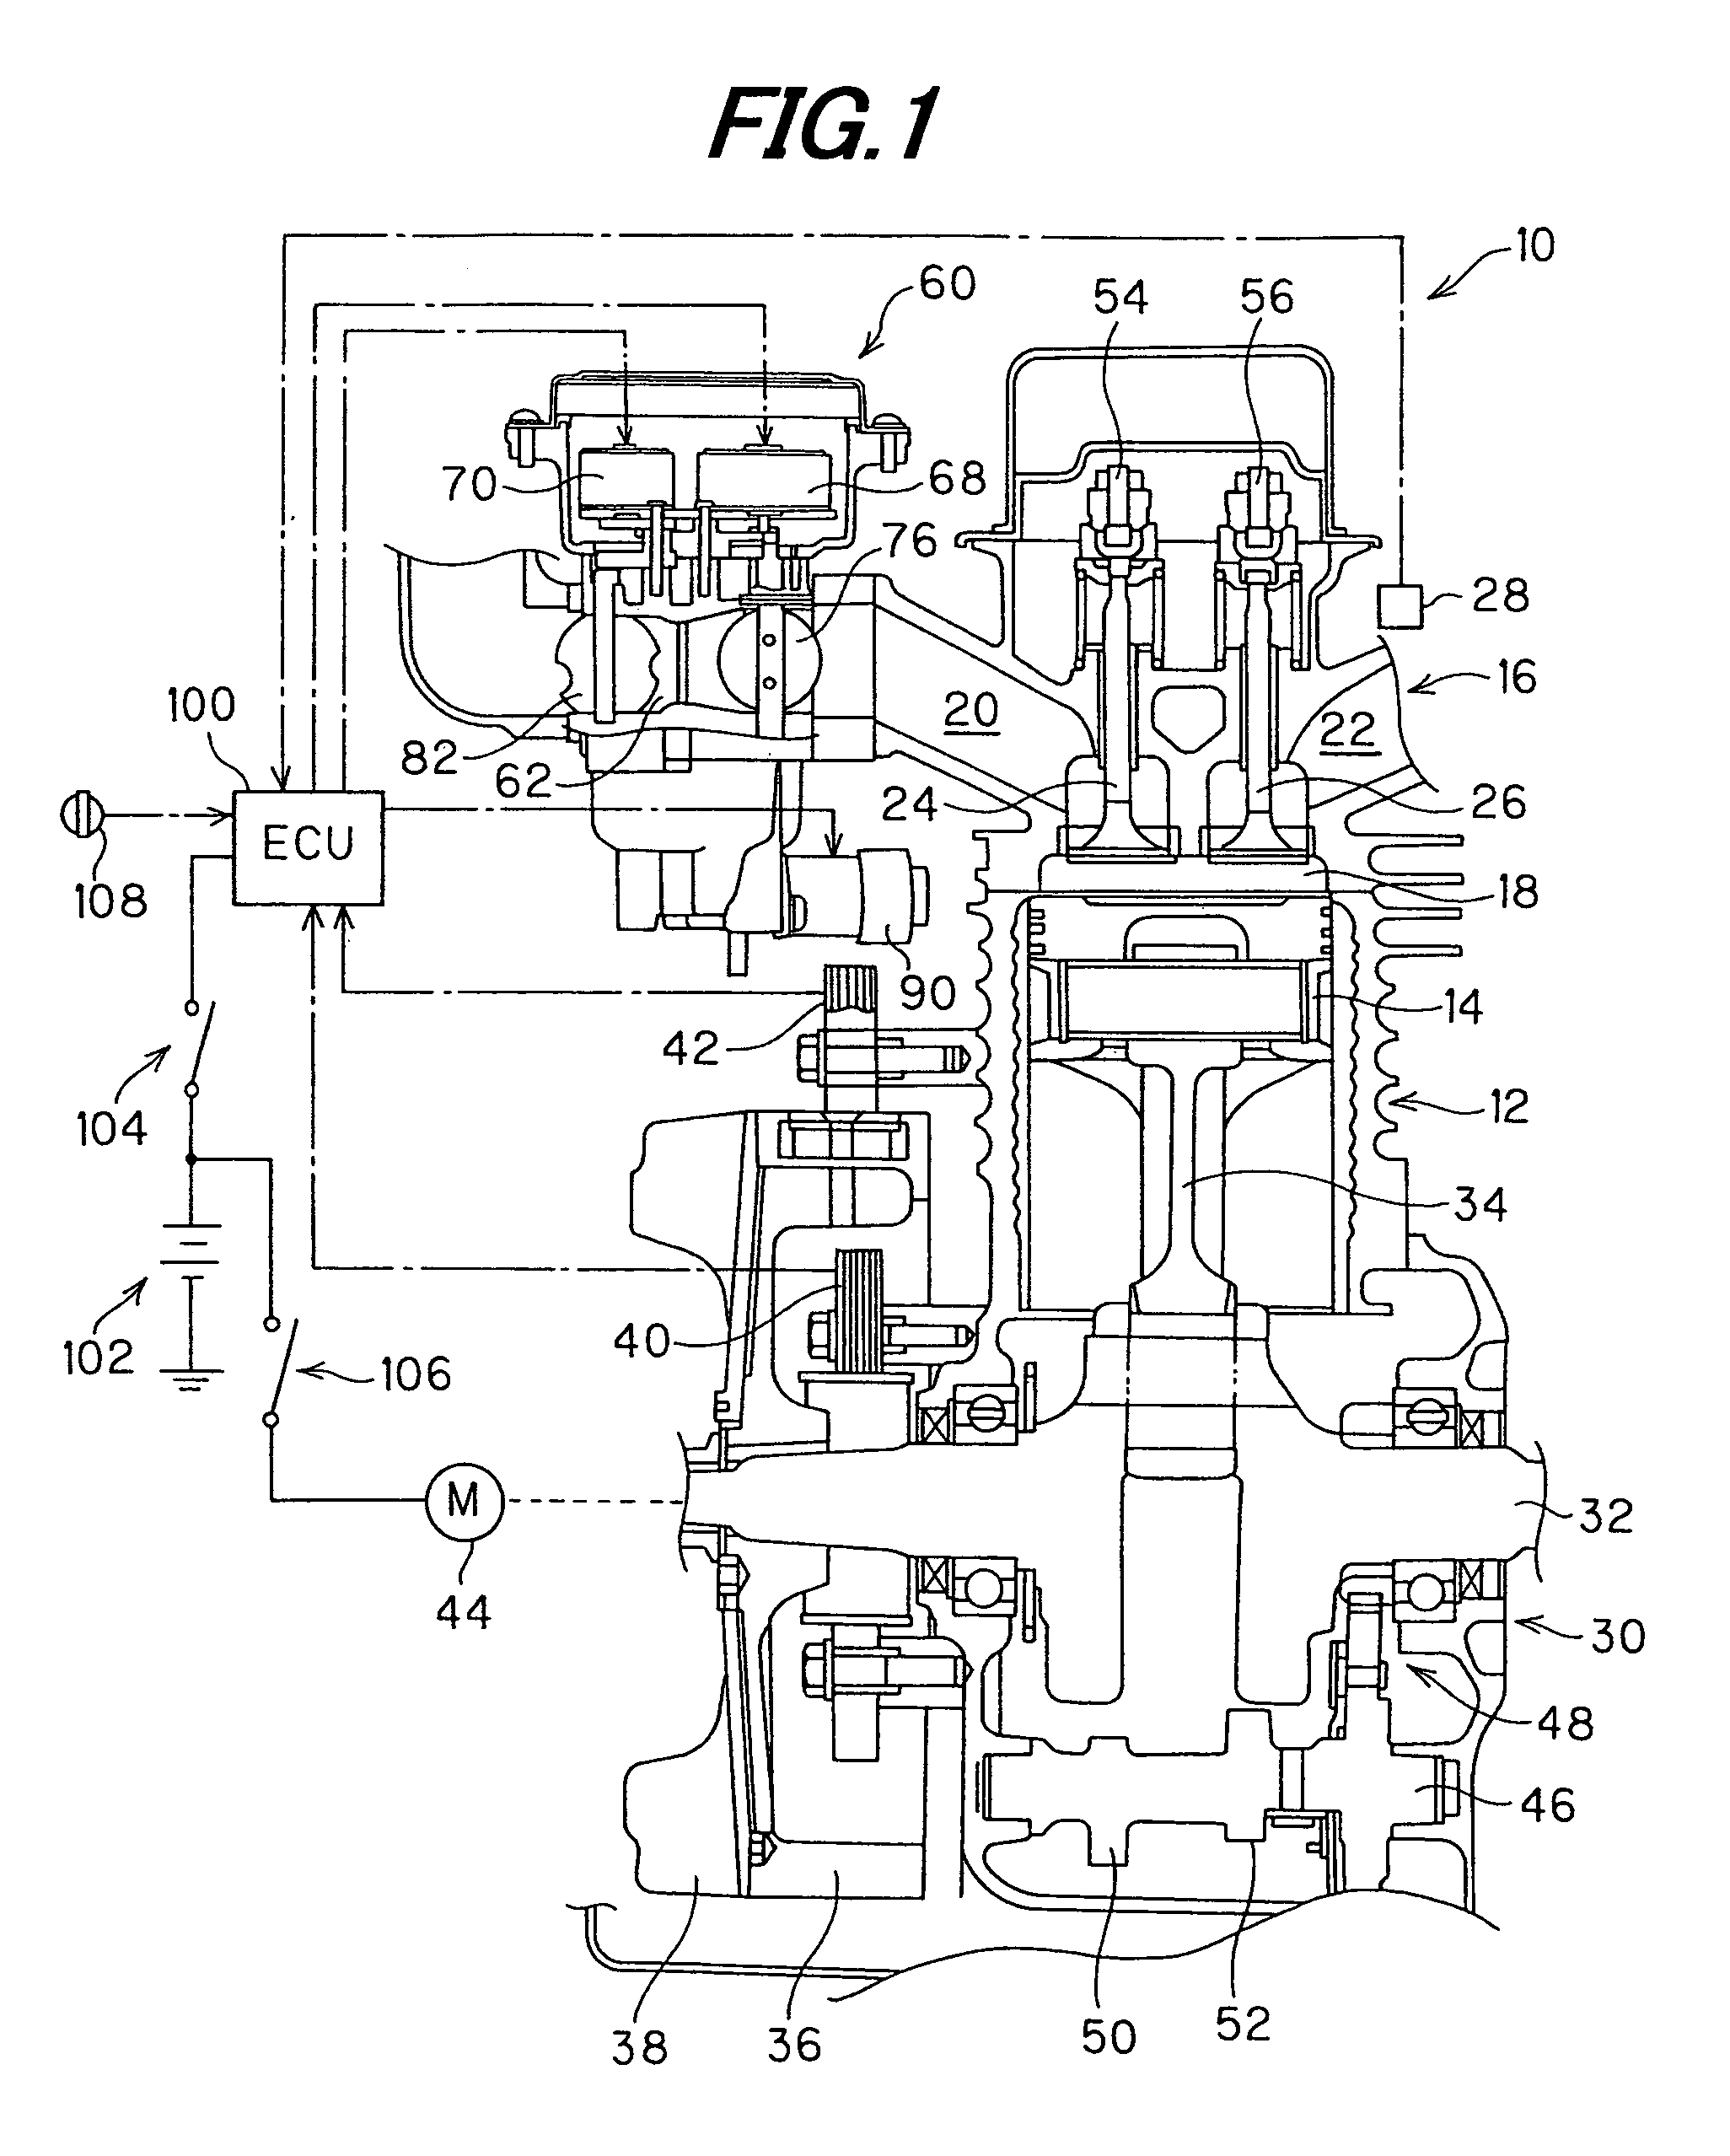 Electrically-actuated throttle device for general-purpose engine